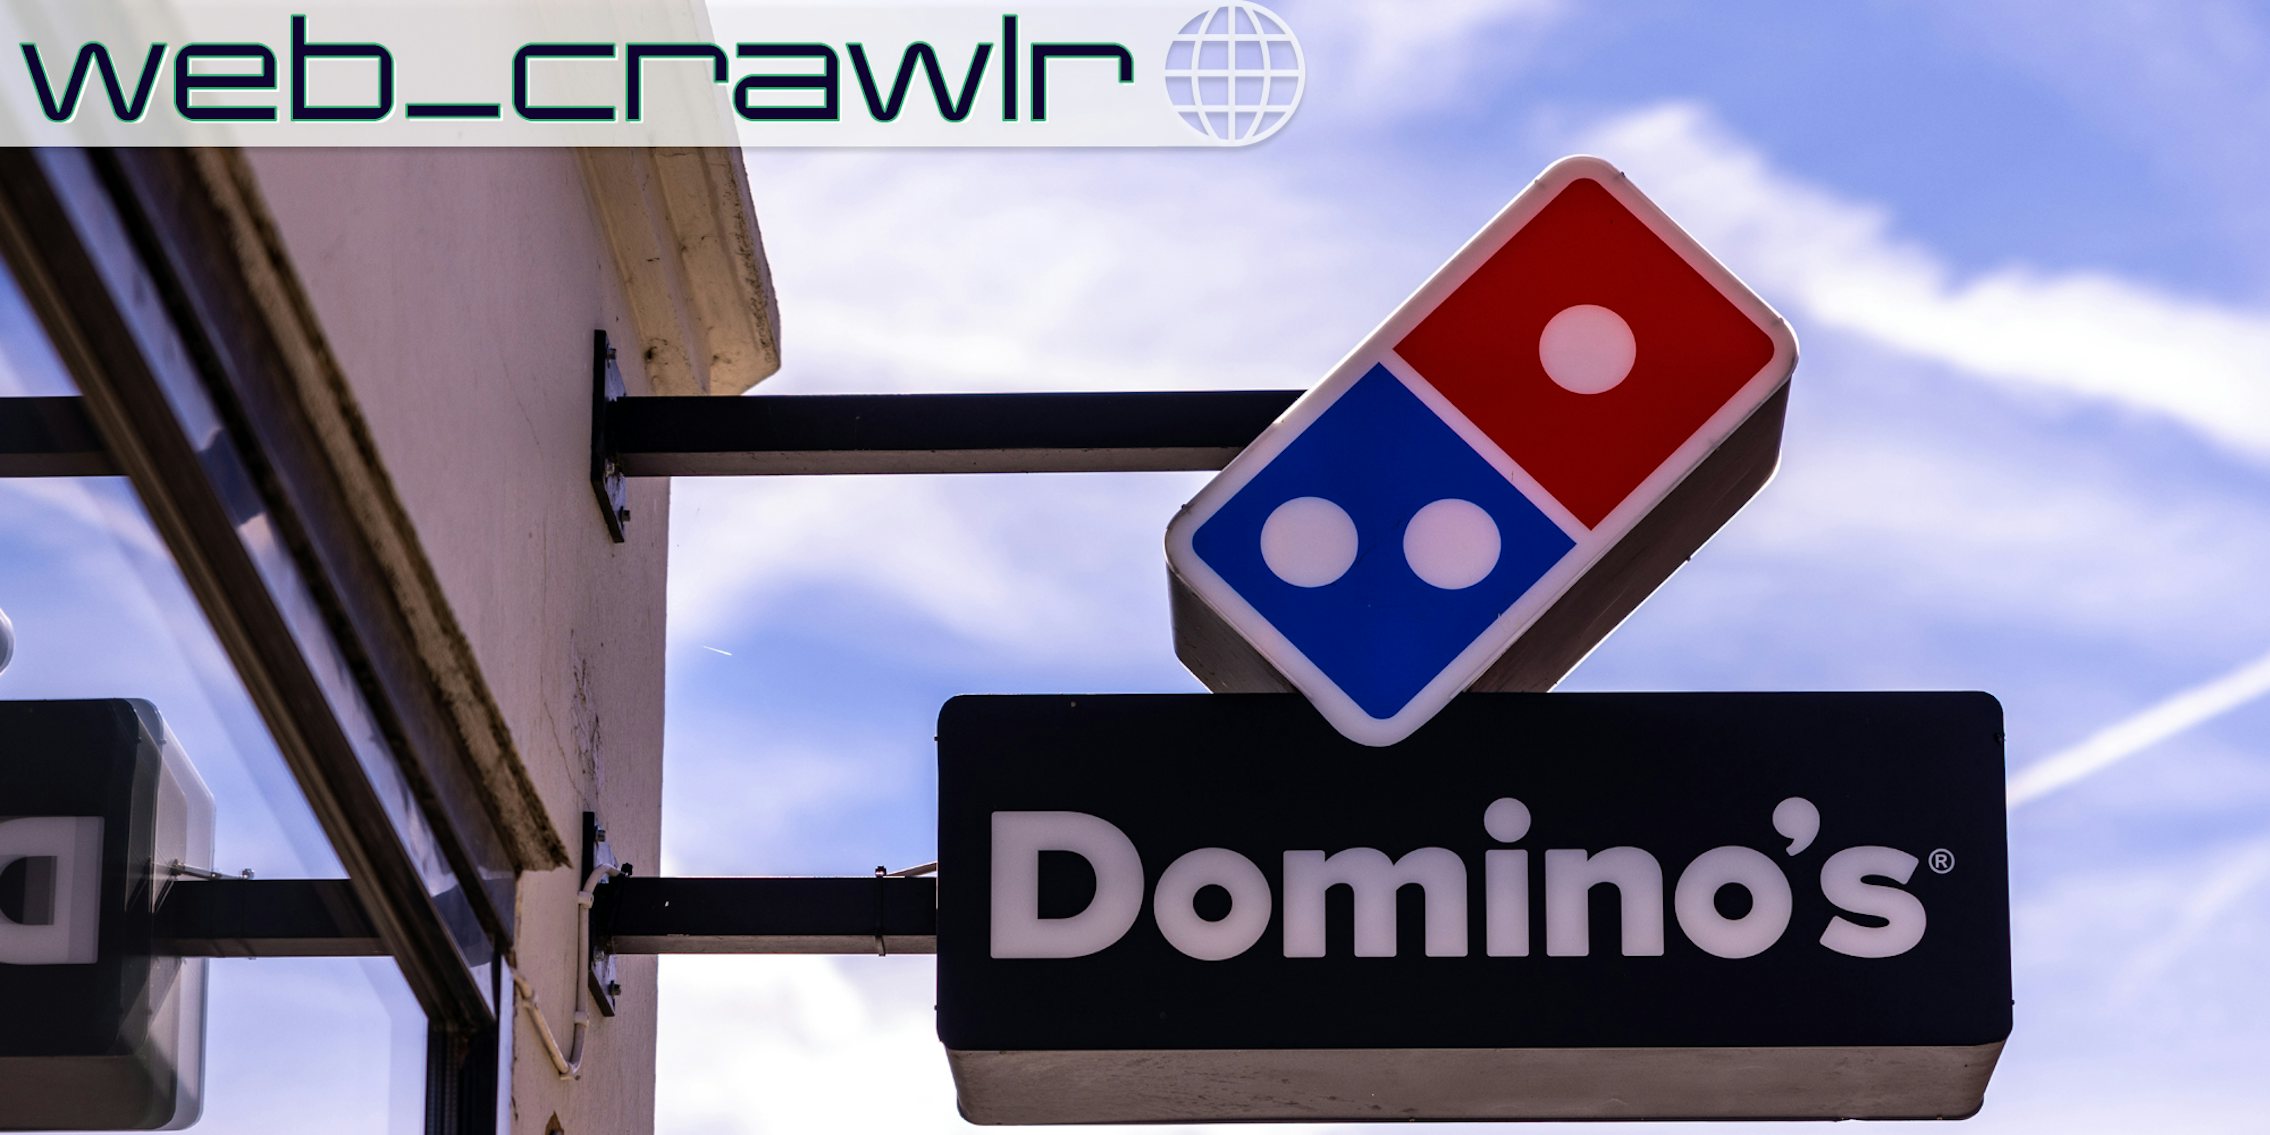 A Domino's Pizza sign. The Daily Dot newsletter web_crawlr logo is in the top left corner.